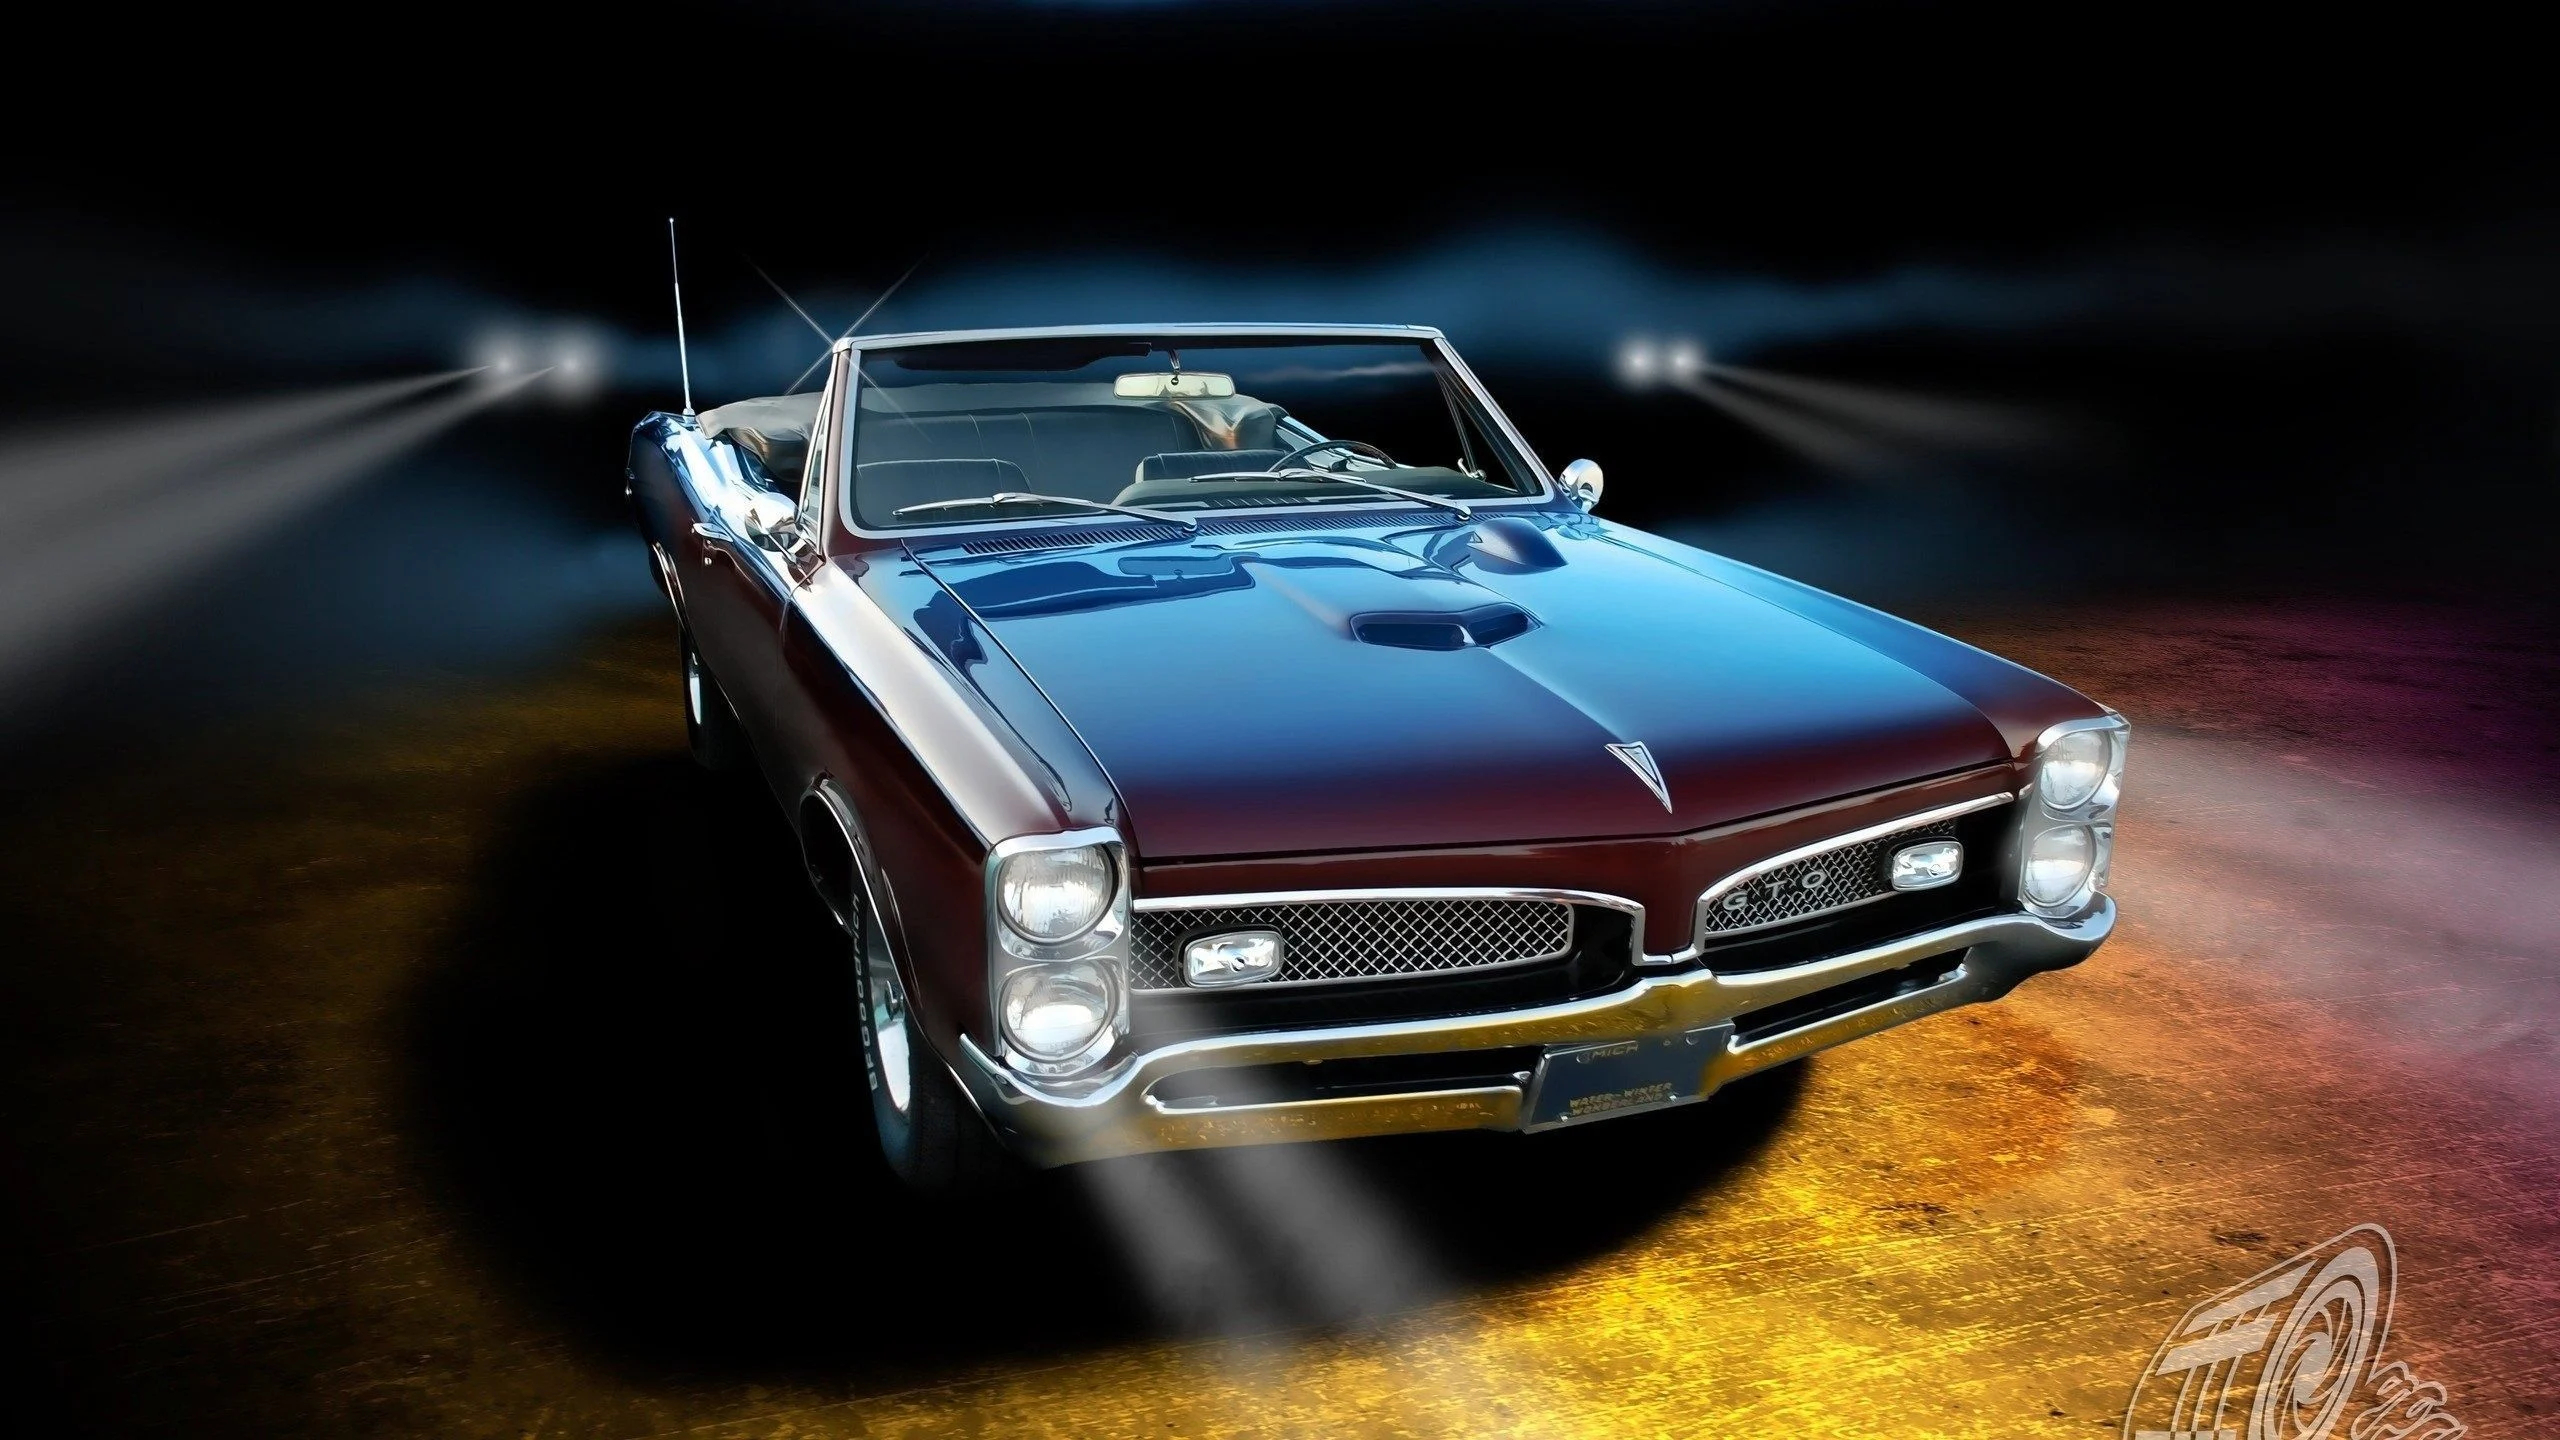 2560x1440 Vintage Old Muscle Cars Wallpapers Top Free Vintage Old Muscle Cars Backgrounds